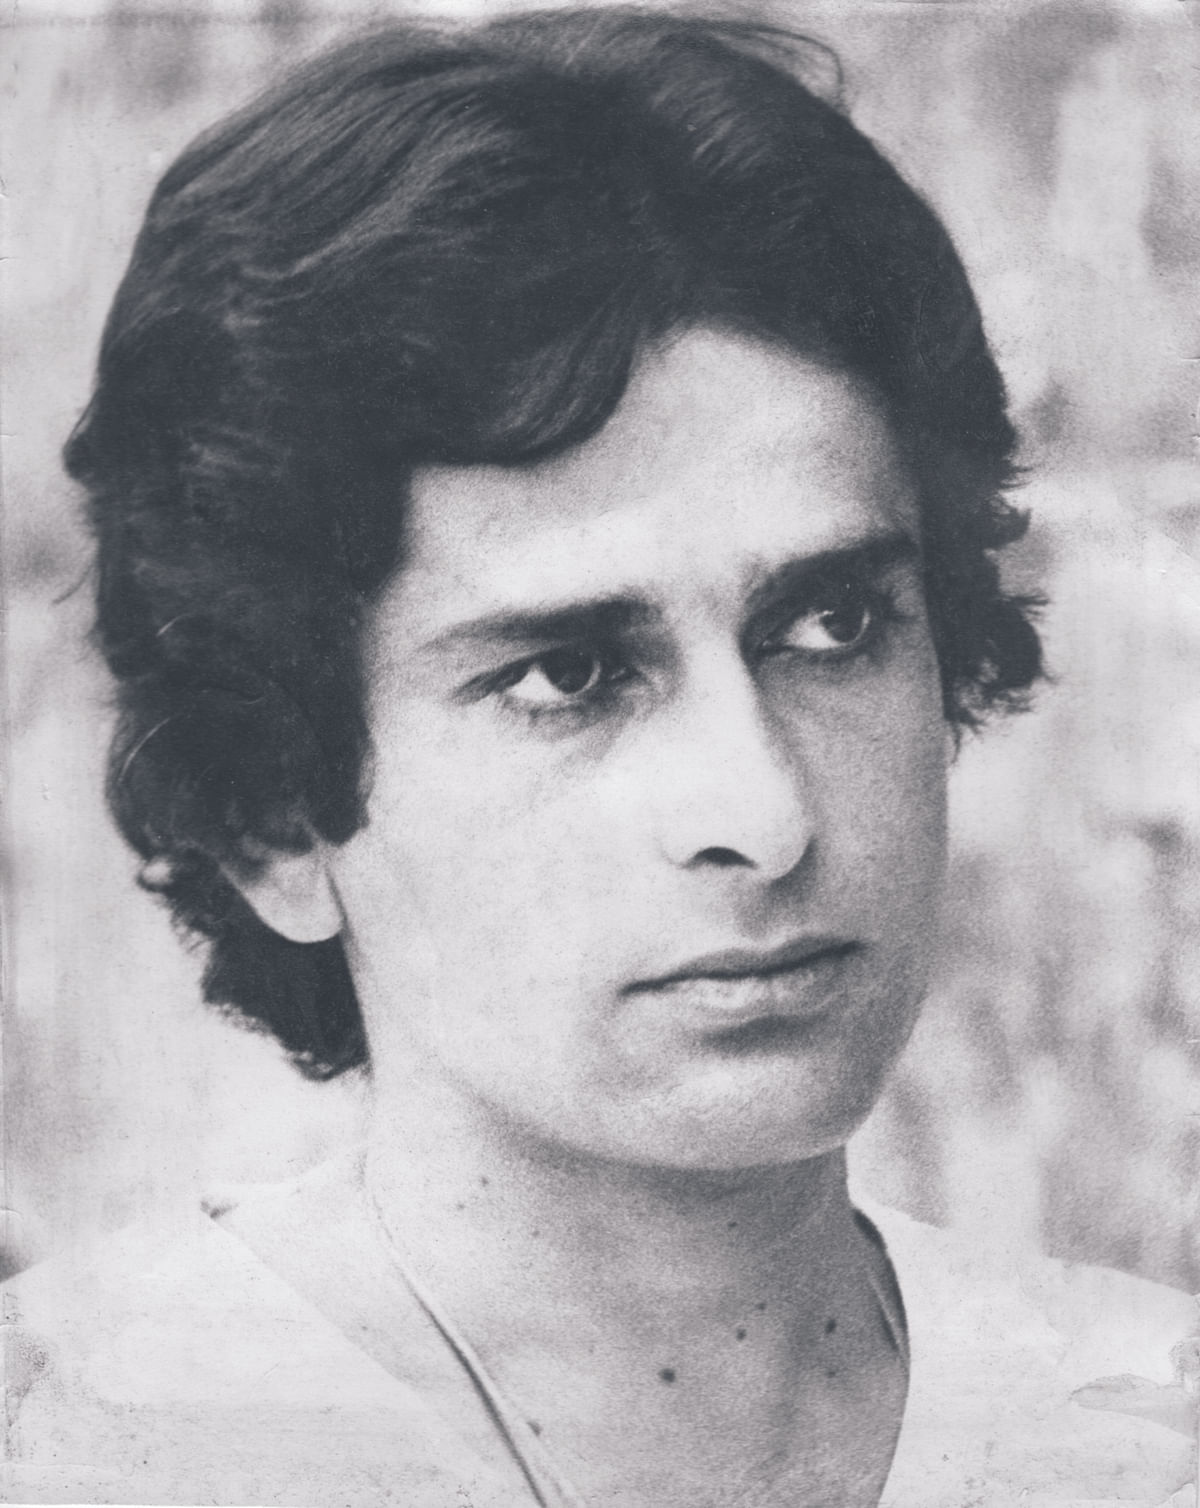 IFFI 2015 will hold a retrospective of Shashi Kapoor’s films